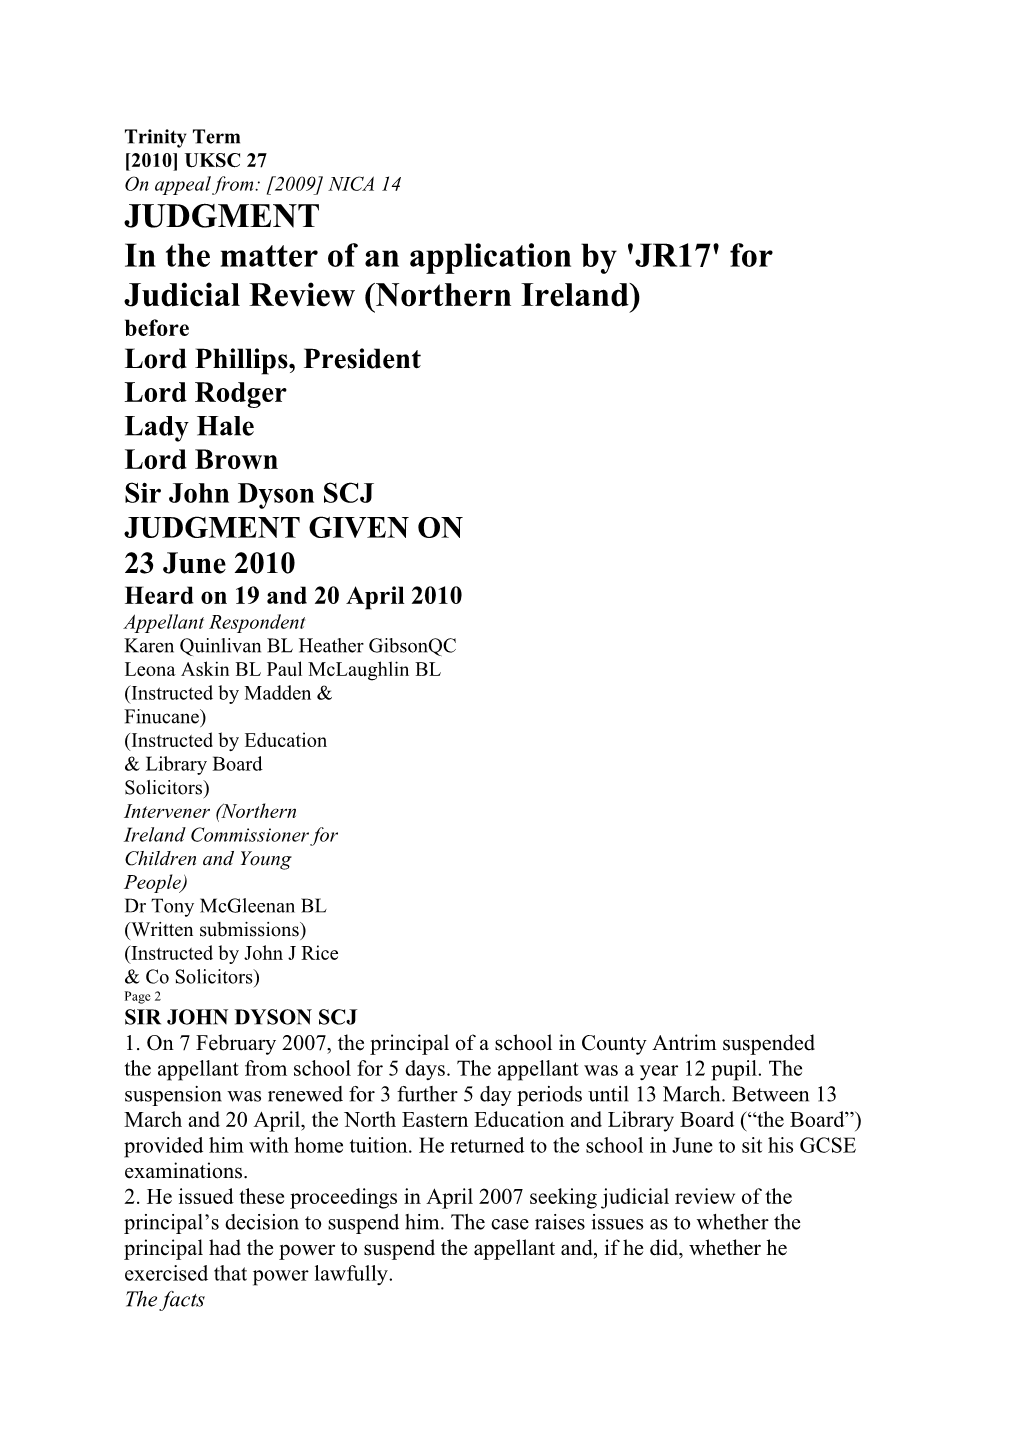 In the Matter of an Application by 'JR17' For